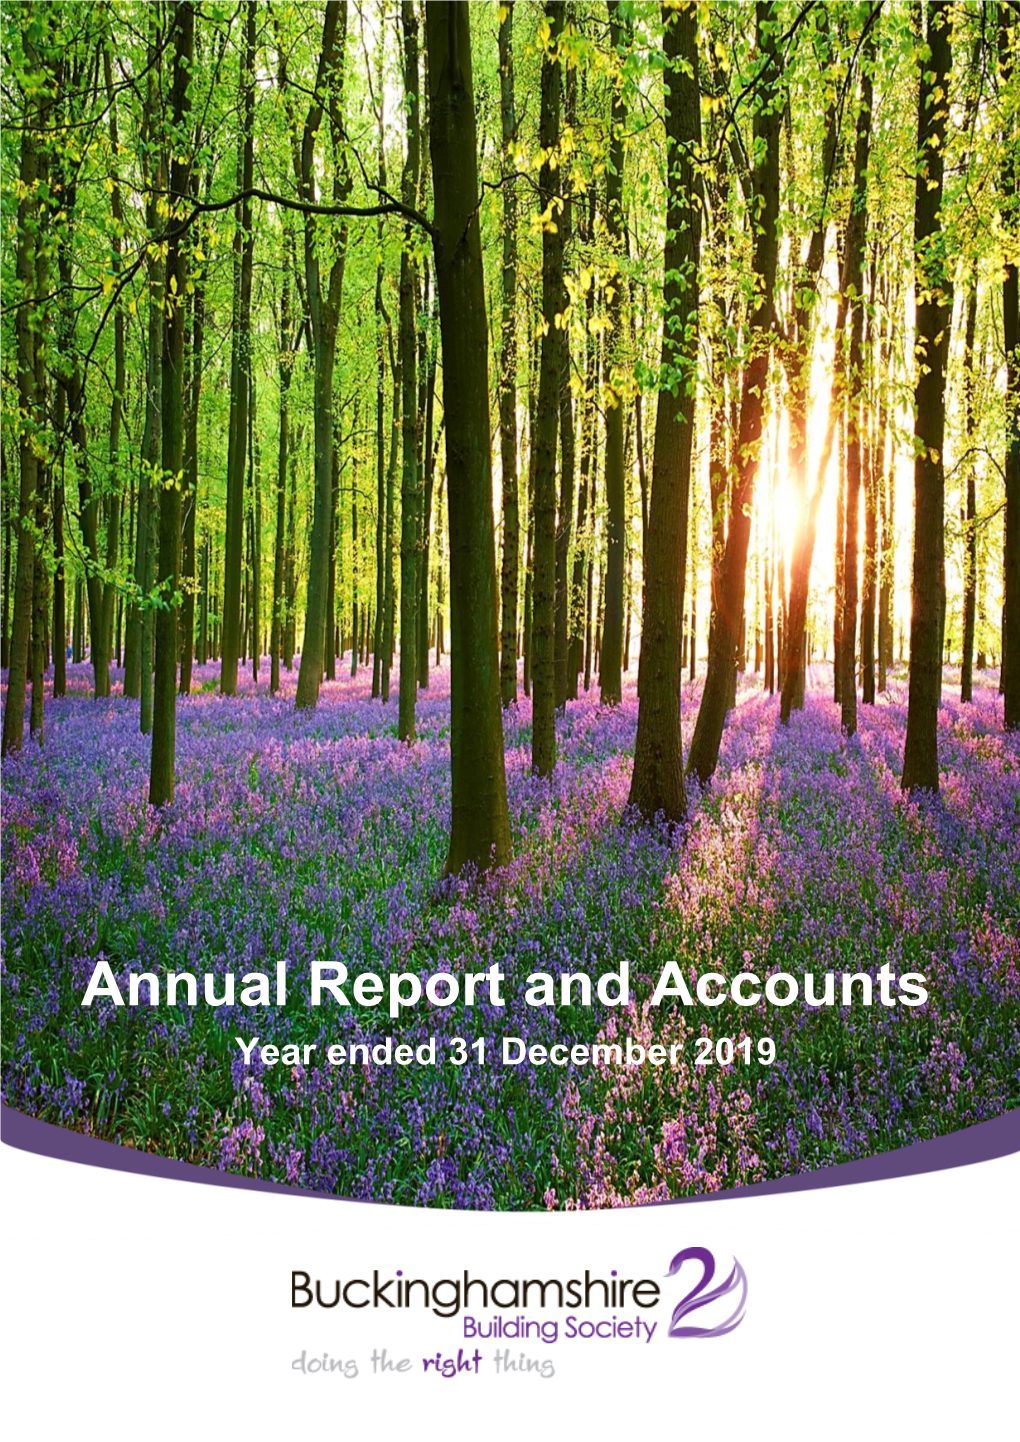 Annual Report and Accounts Year Ended 31 December 2019